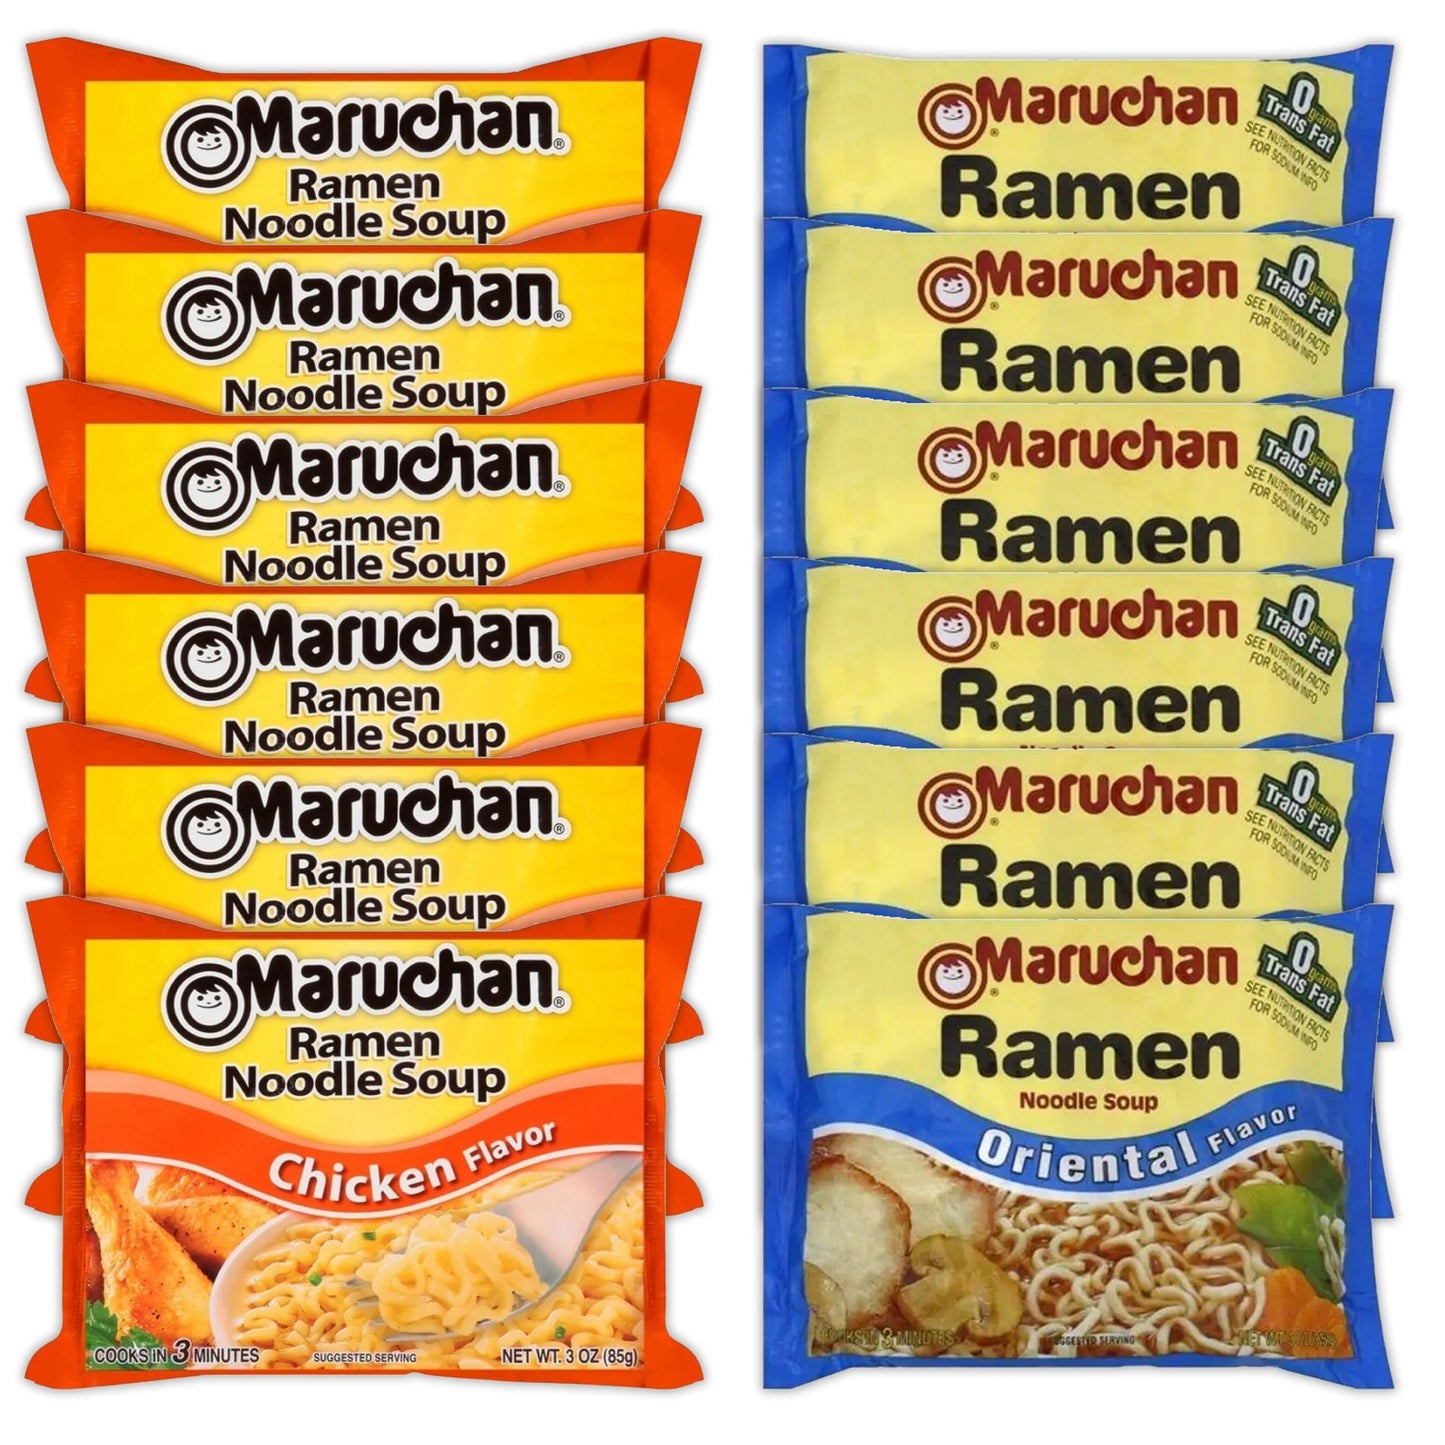 Maruchan Ramen Instant Noodle Soup Variety, 2 Flavors - 6 Packs Chicken & 6 Packs Soy Sauce , 3 Ounce Single Servings Lunch / Dinner Variety